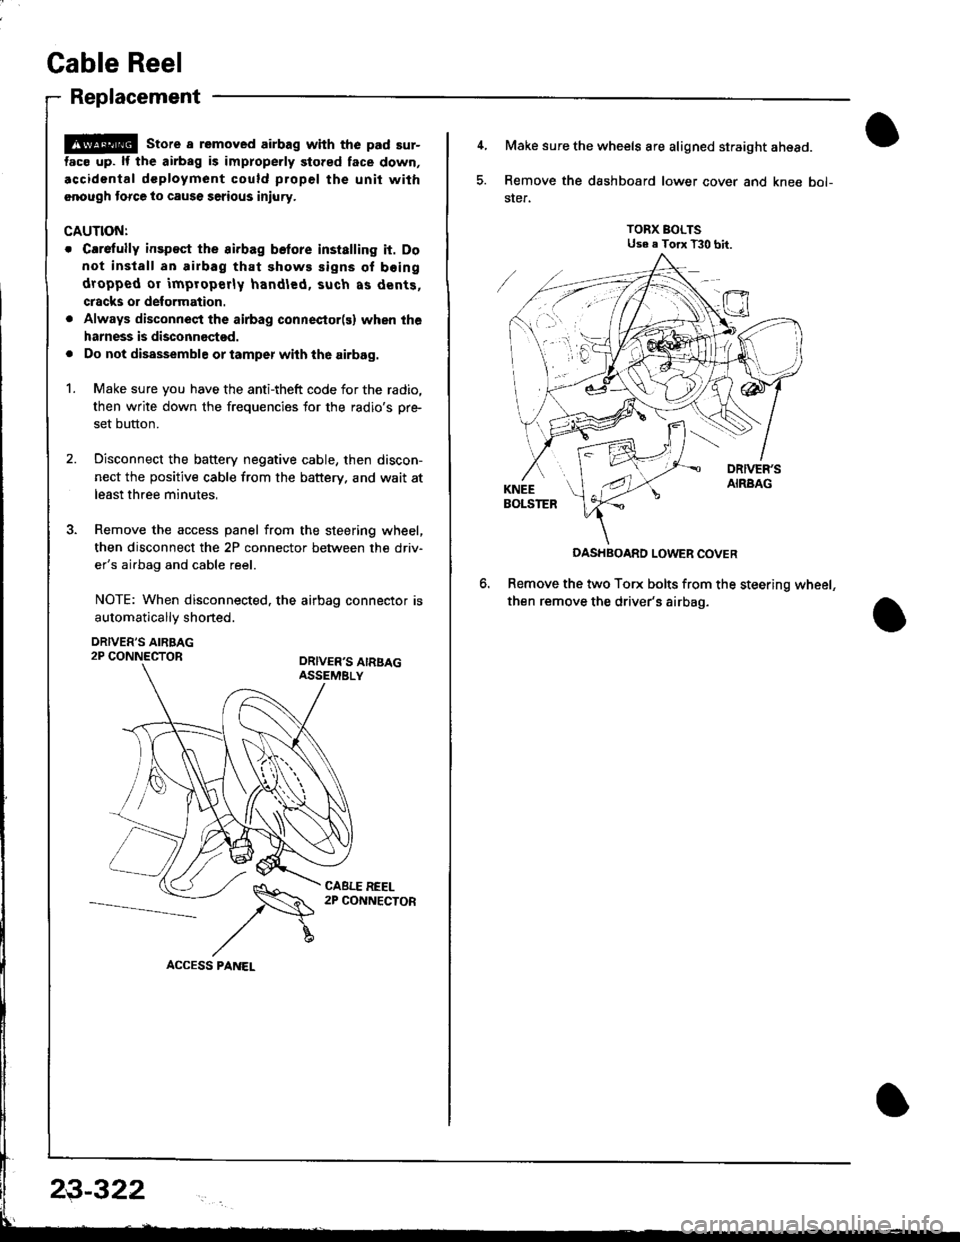 HONDA INTEGRA 1998 4.G Workshop Manual Cable Reel
Replacement
@ store a removed airbag with the pad sur-
tac€ up. lf the airbag is improperly stored face down,
.ccidontal dcployment could propel the unit with
.nough torce to cause seriou